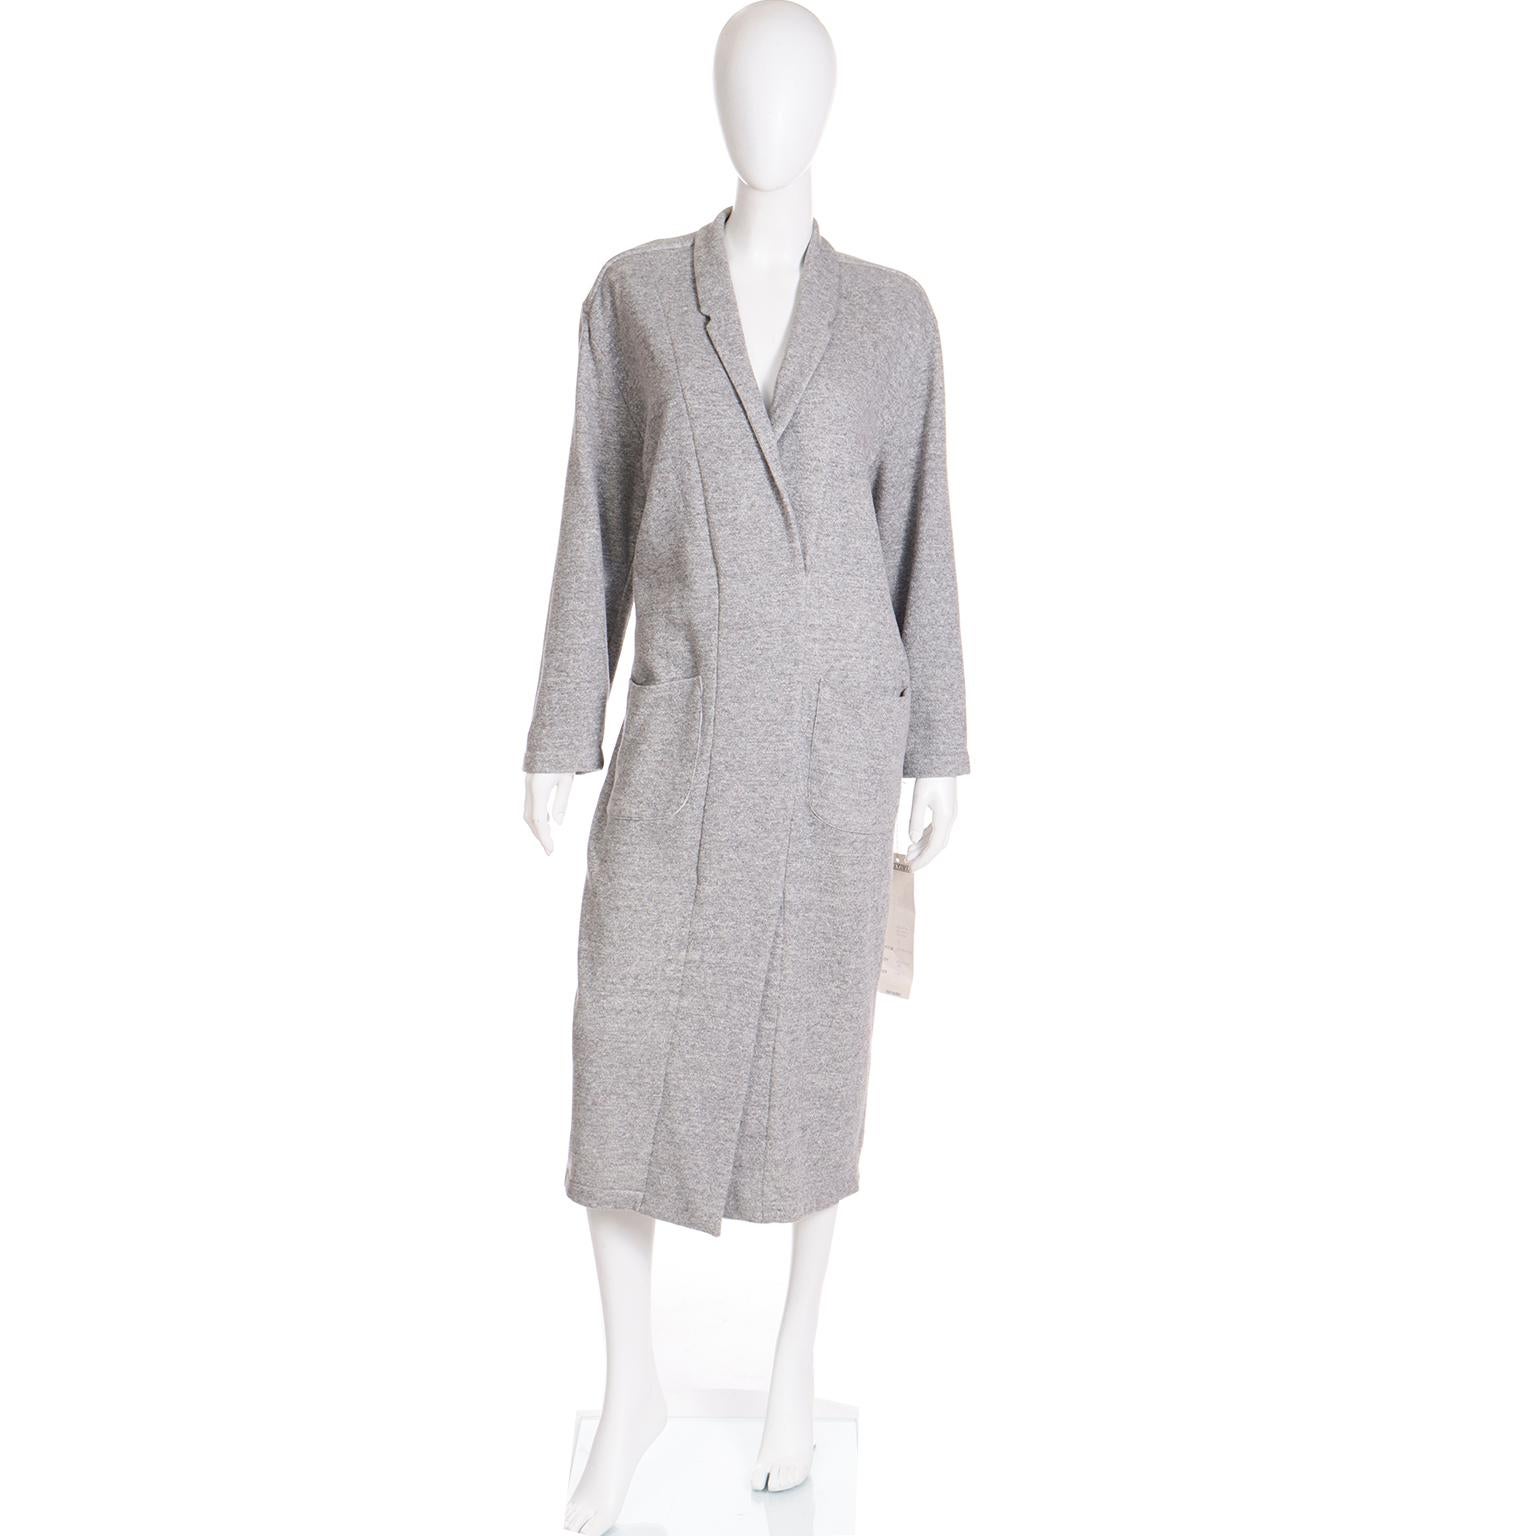 This cozy, fun vintage 1980's Norma Kamali dress is made from Kamali's signature grey sweatshirt fabric and it was never worn! This collectible dress slips overhead and has front patch pockets and a V front with no closures. You can wear it as shown